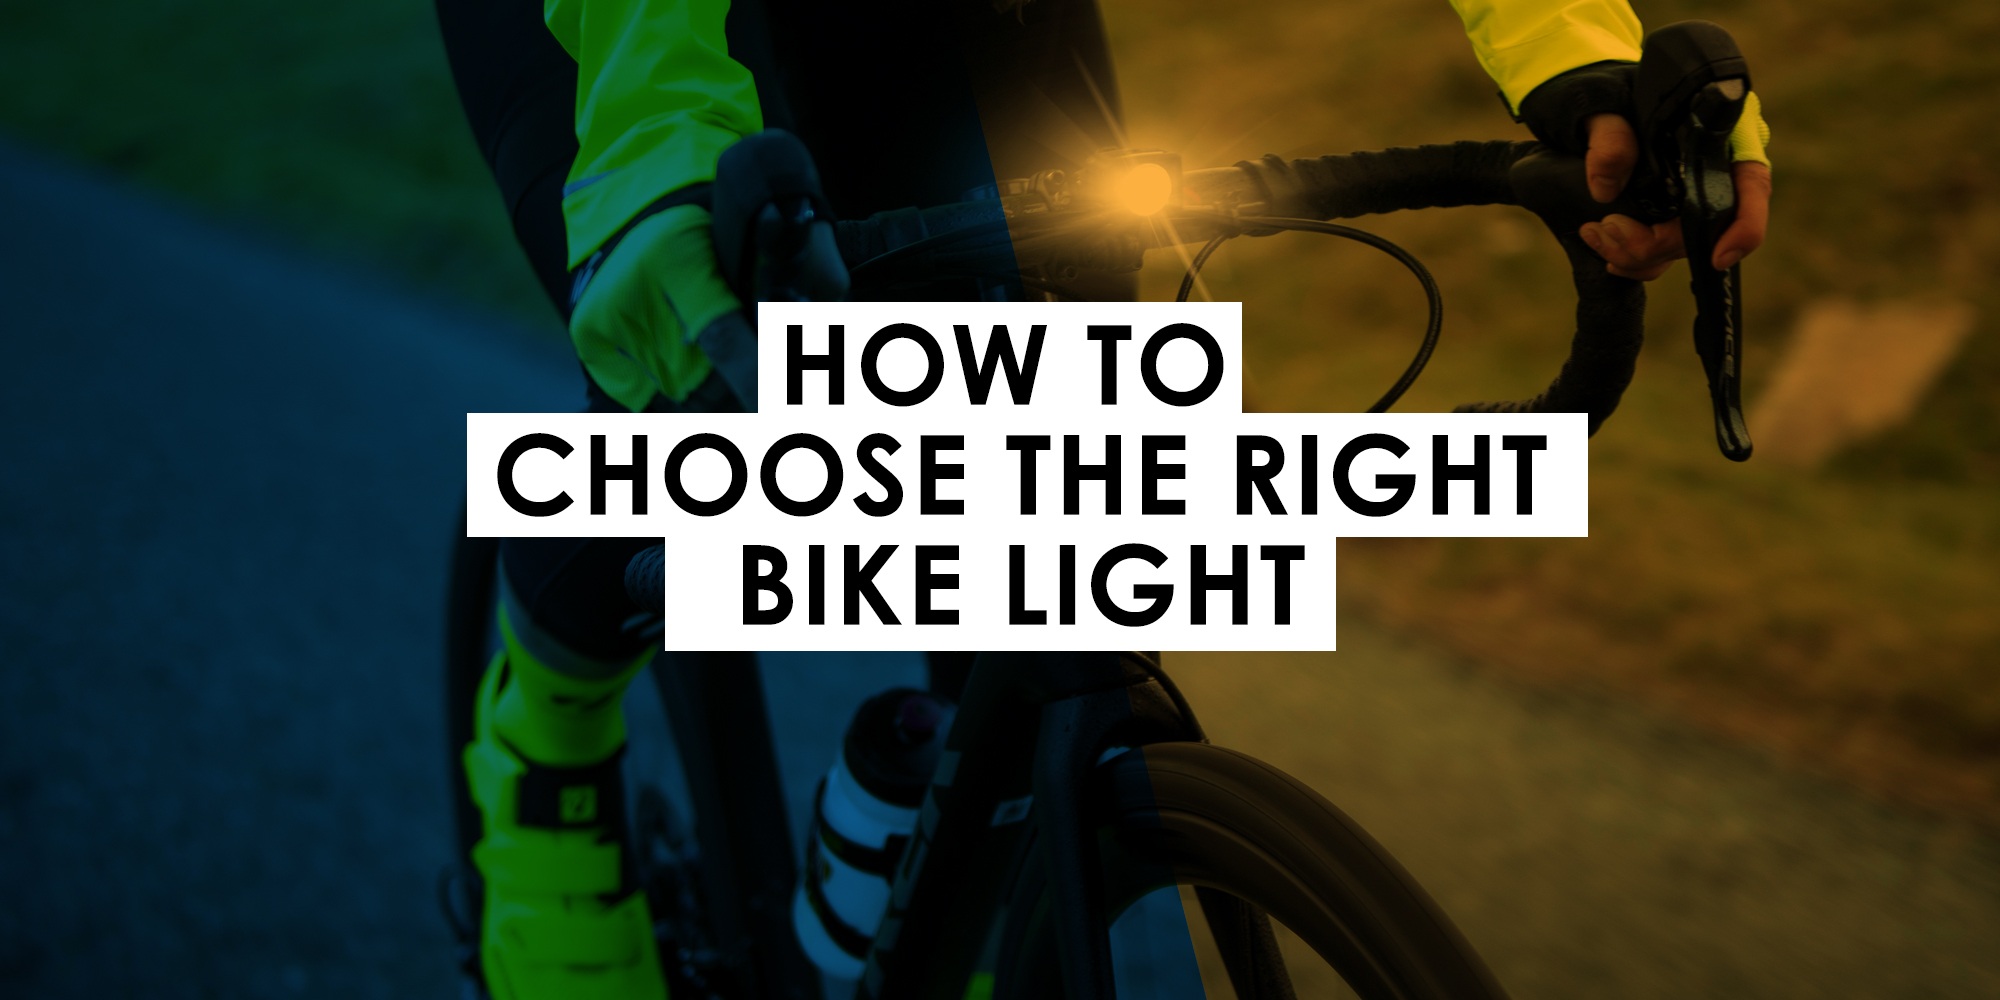 How to choose the right bike light